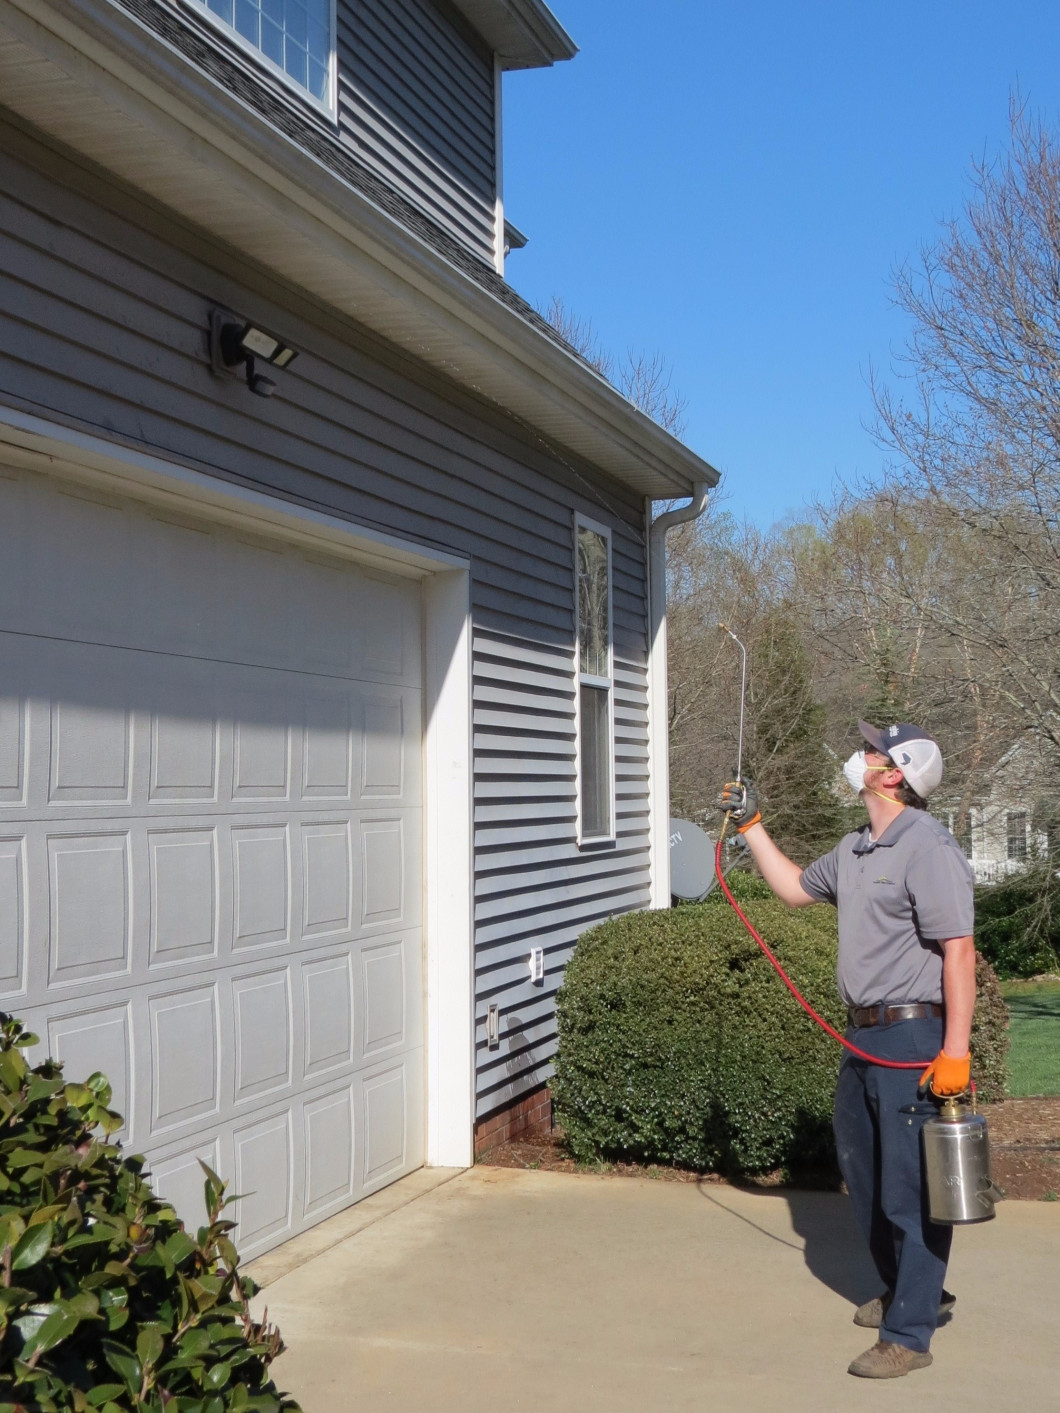 Pest Control Services in Easley and Greenville SC